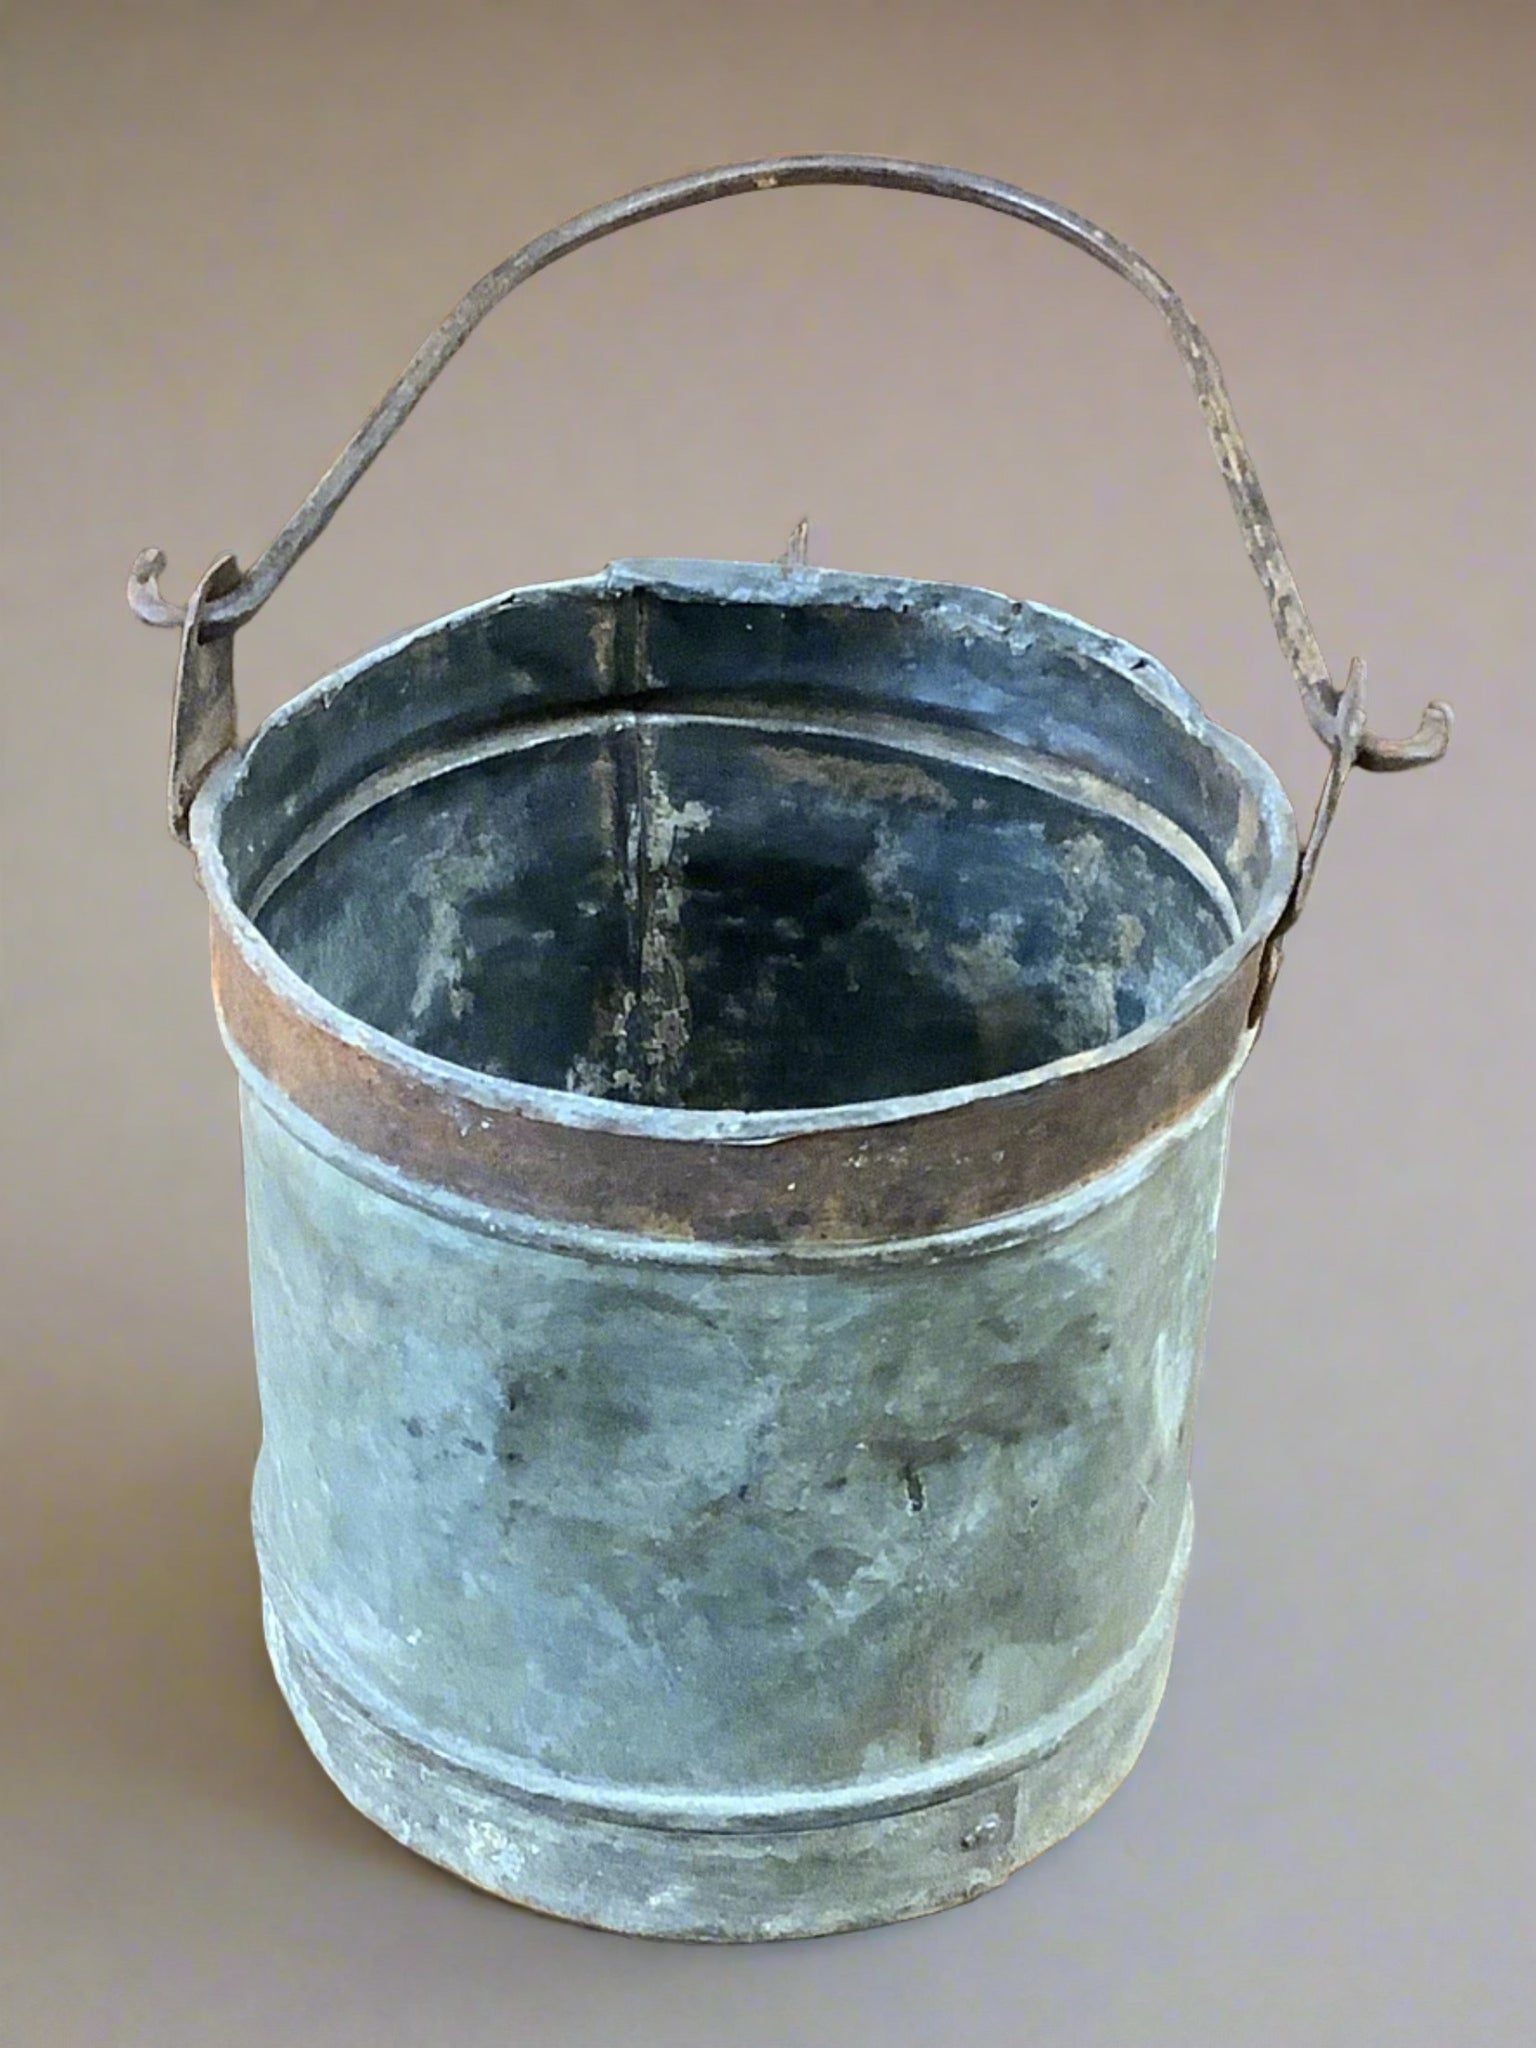 Steel metal bucket with copper banding and a curved metal handle.